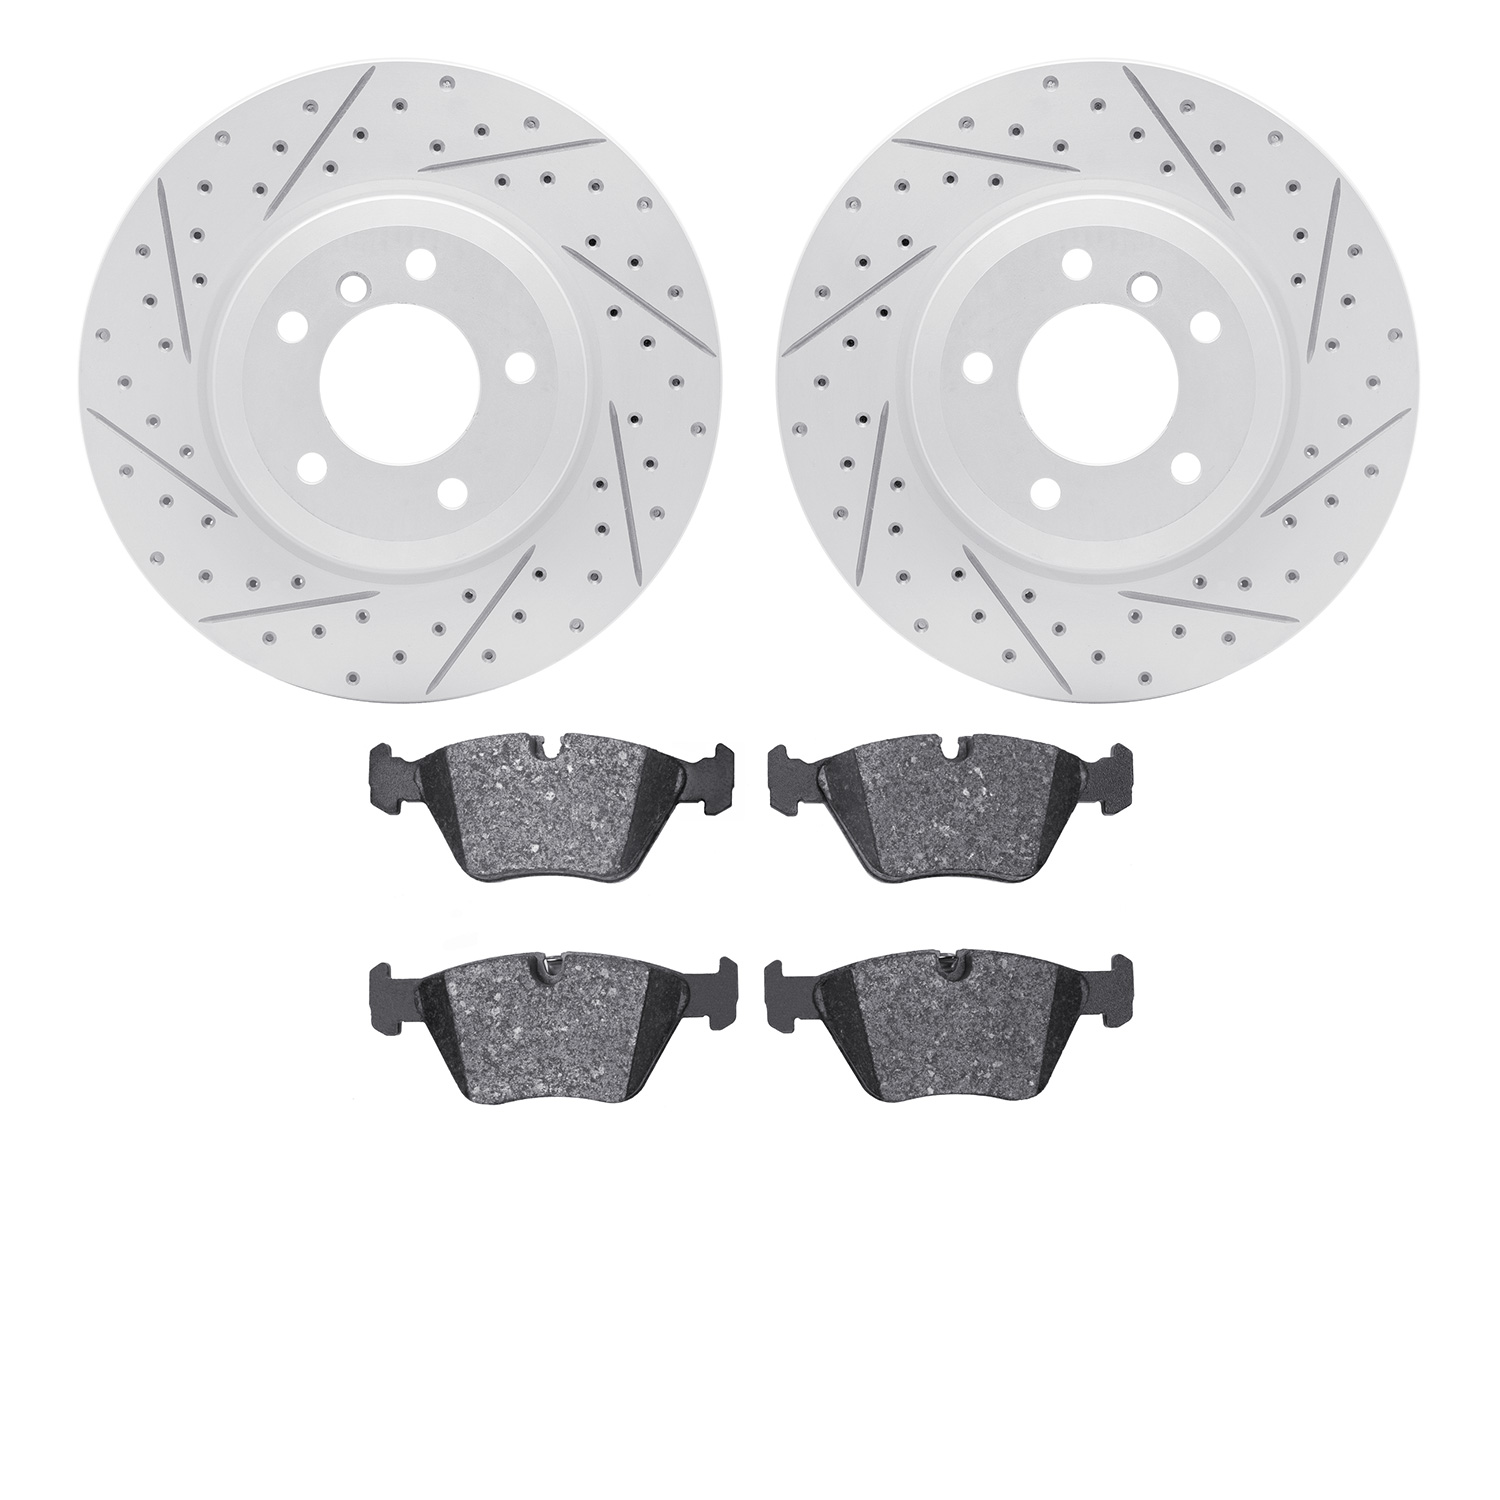 2502-31029 Geoperformance Drilled/Slotted Rotors w/5000 Advanced Brake Pads Kit, 2001-2008 BMW, Position: Front